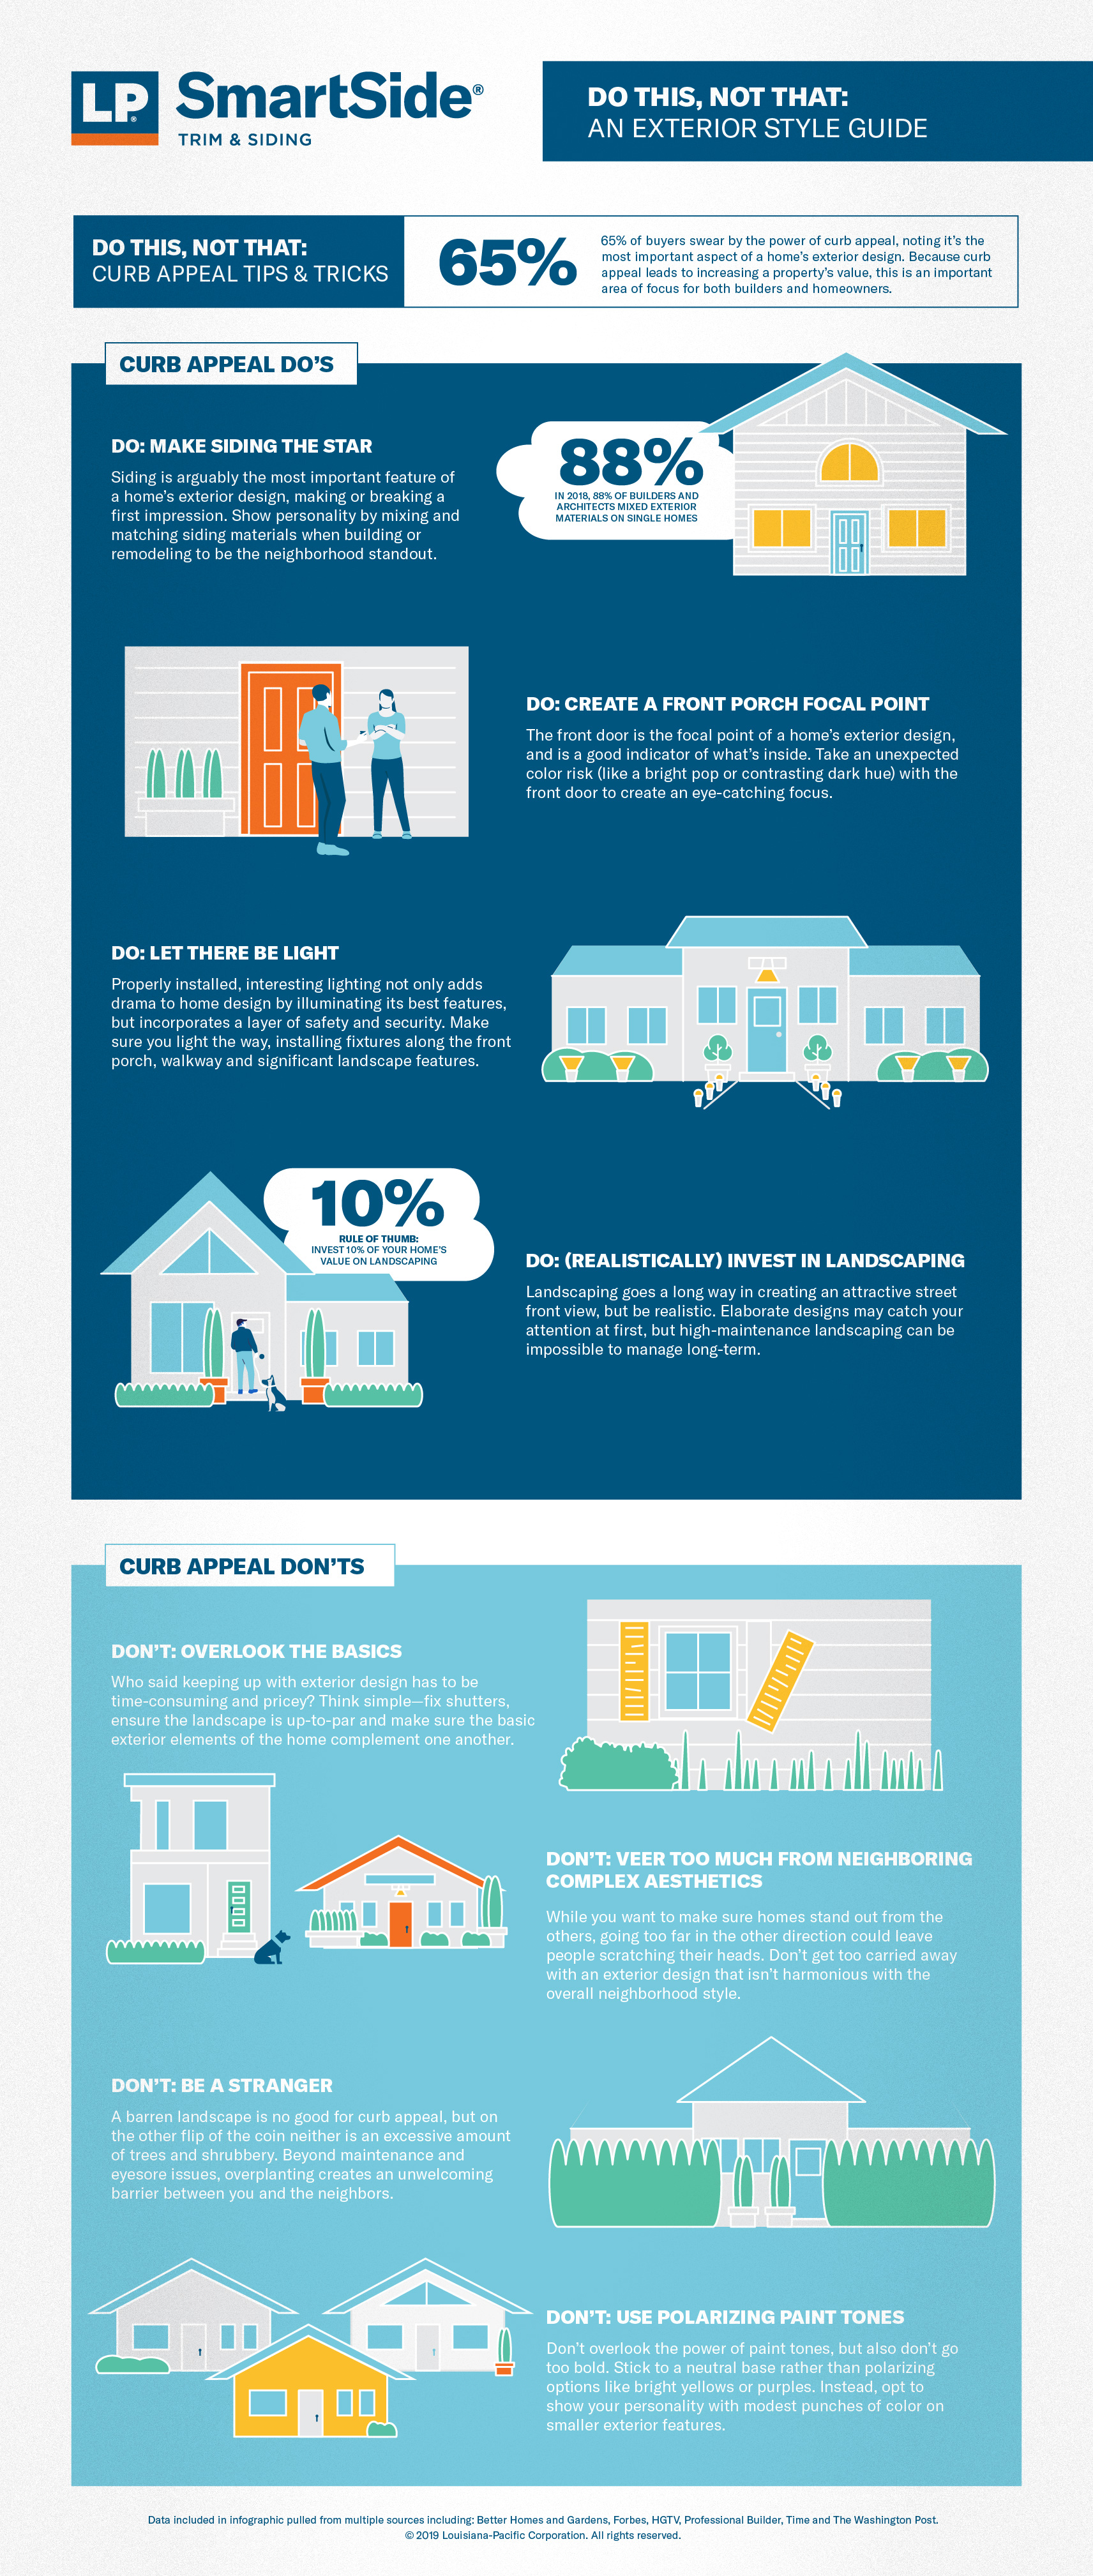 infographic_4-dos-donts-of-curb-appeal-lp-smartside